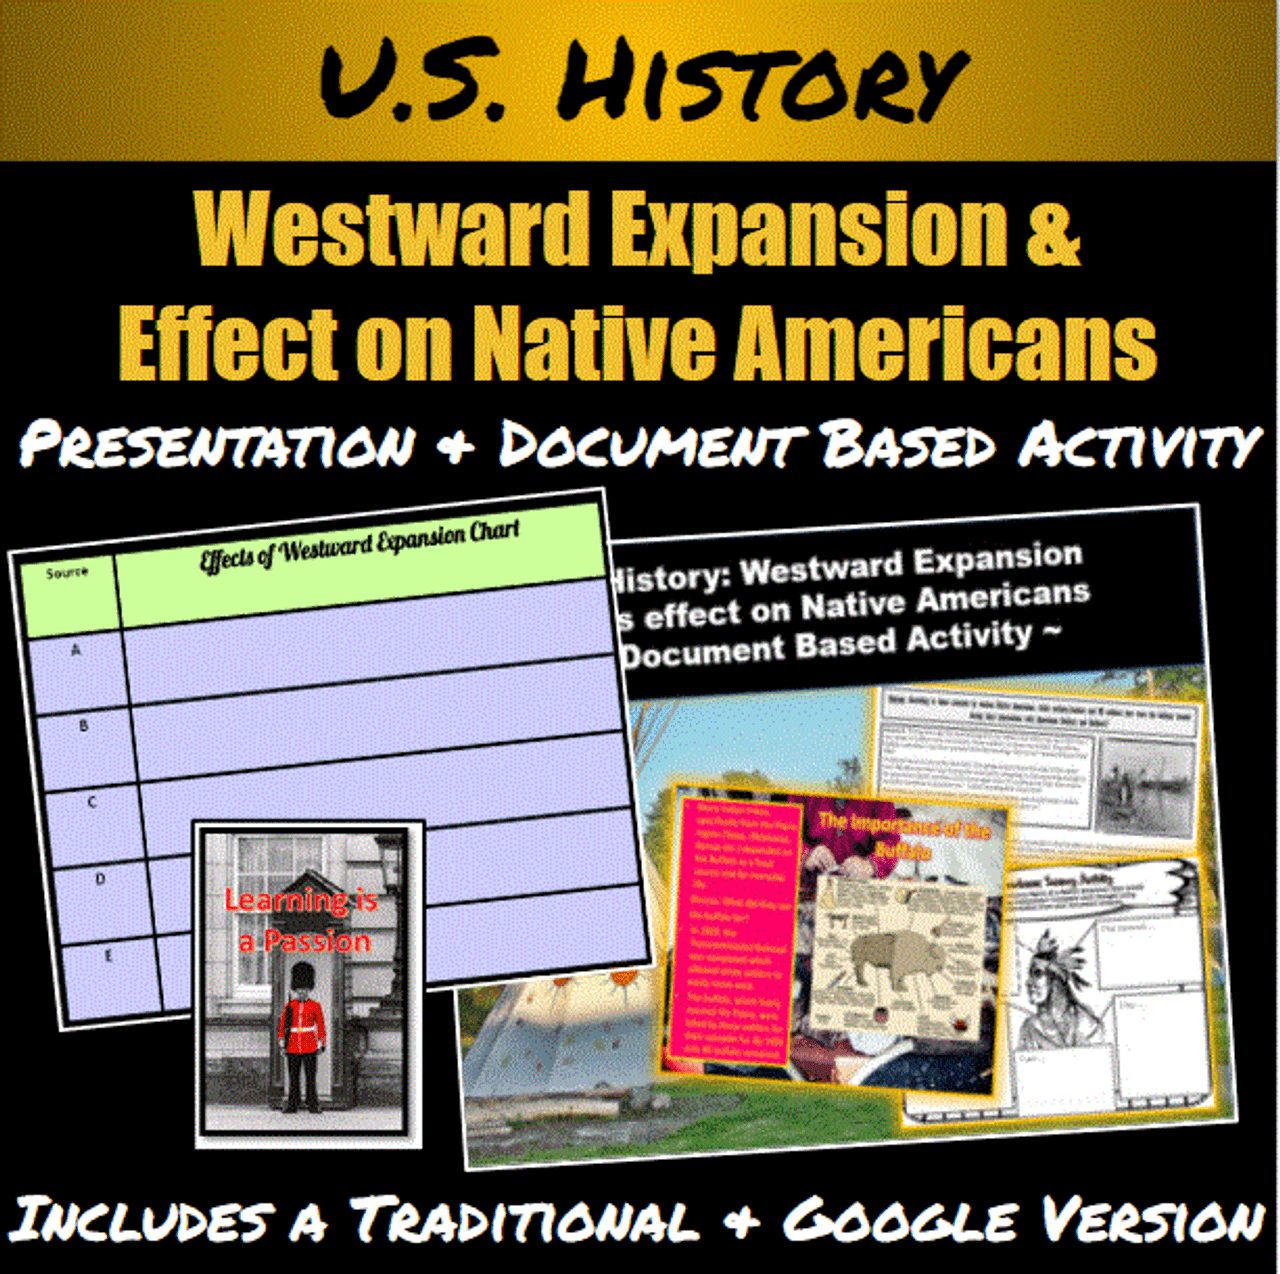 U.S. History | Westward Expansion and its Effect on Native Americans |  Presentation & Document Based Activity 